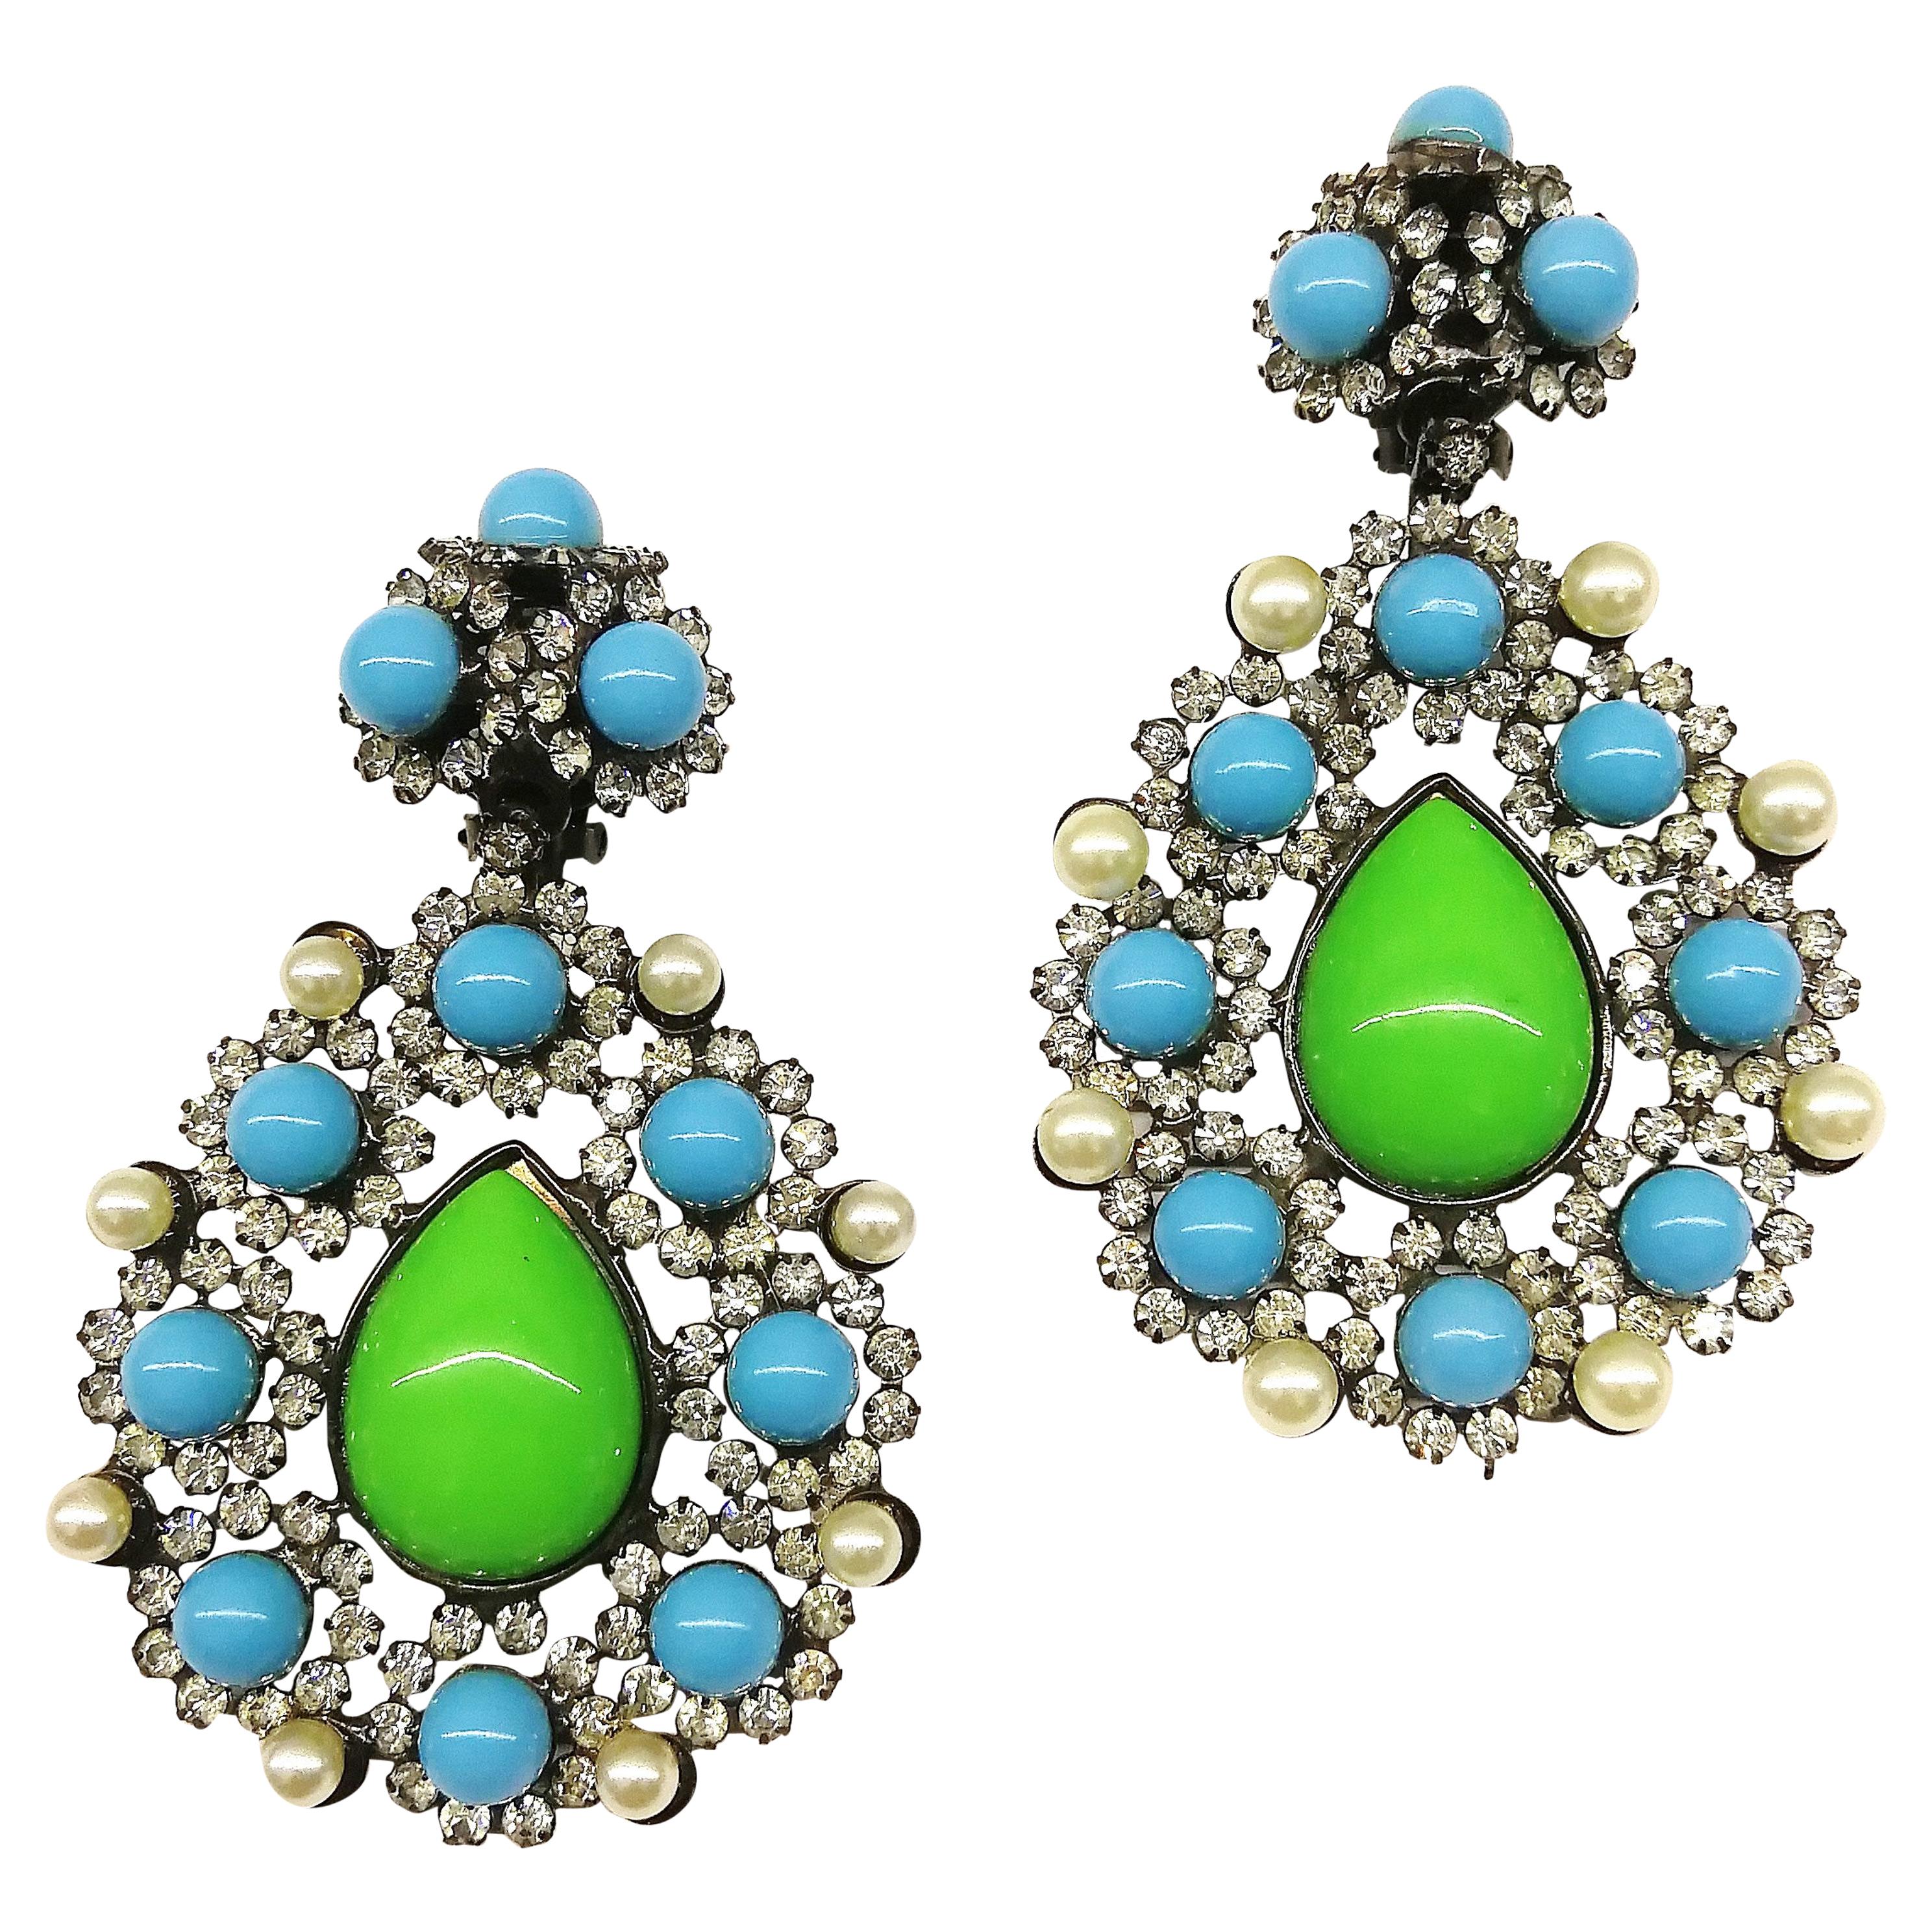 Very large paste, pearl, green and turquoise glass drop earrings, L. Vrba, 1980s